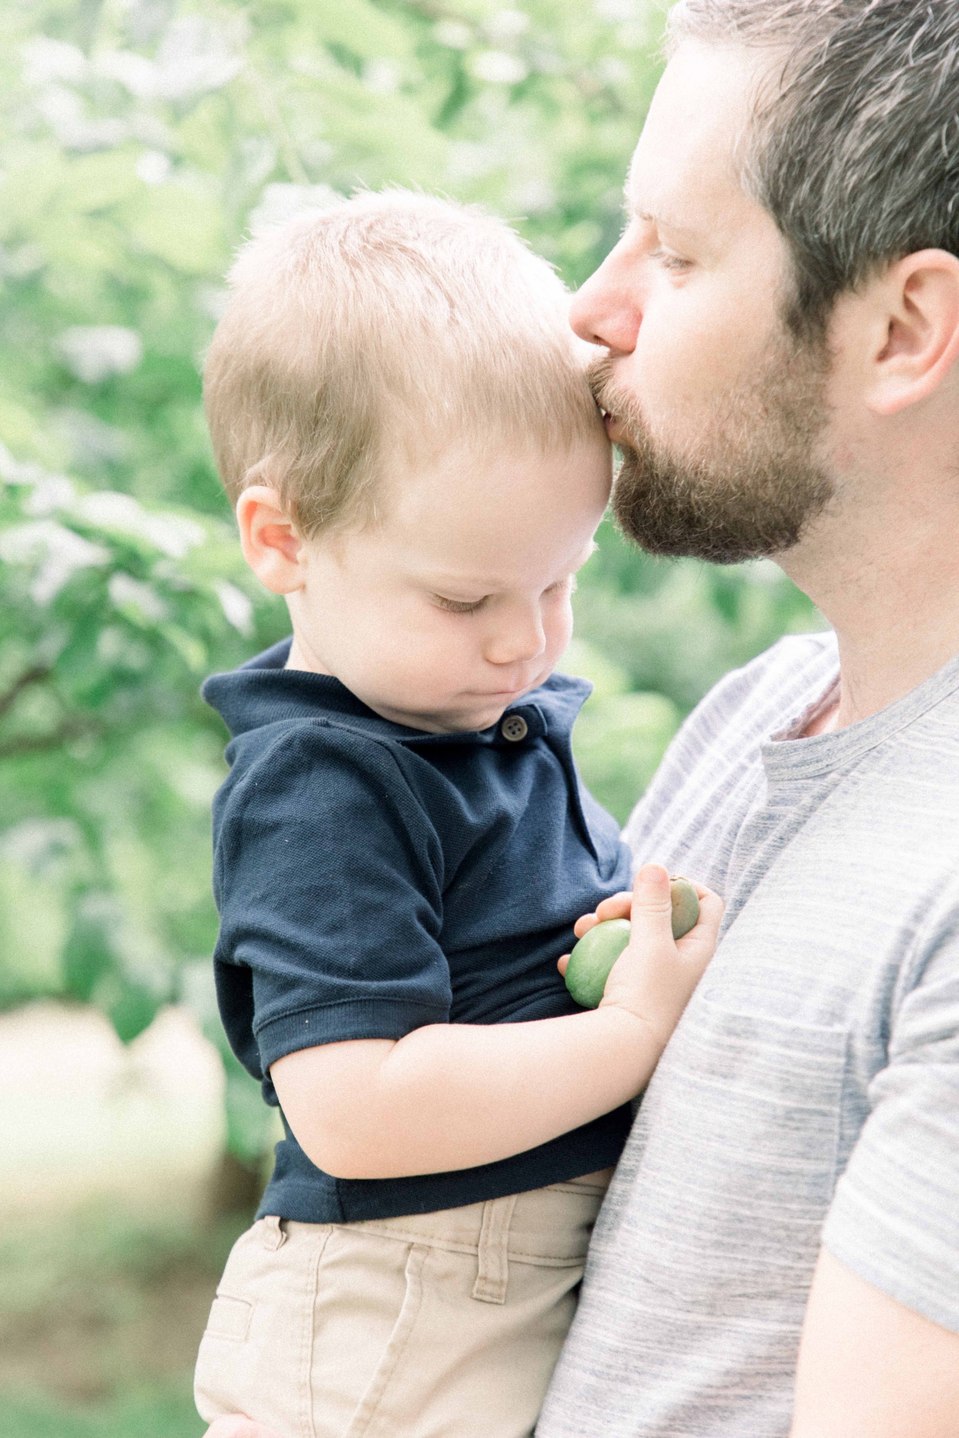 Portrait of father kissing his son on the forehead in orchard, Niagara family photographer, Niagara portrait photographer, family photography, portrait photography, candid photography, authentic photography, Emily VanderBeek Photography.